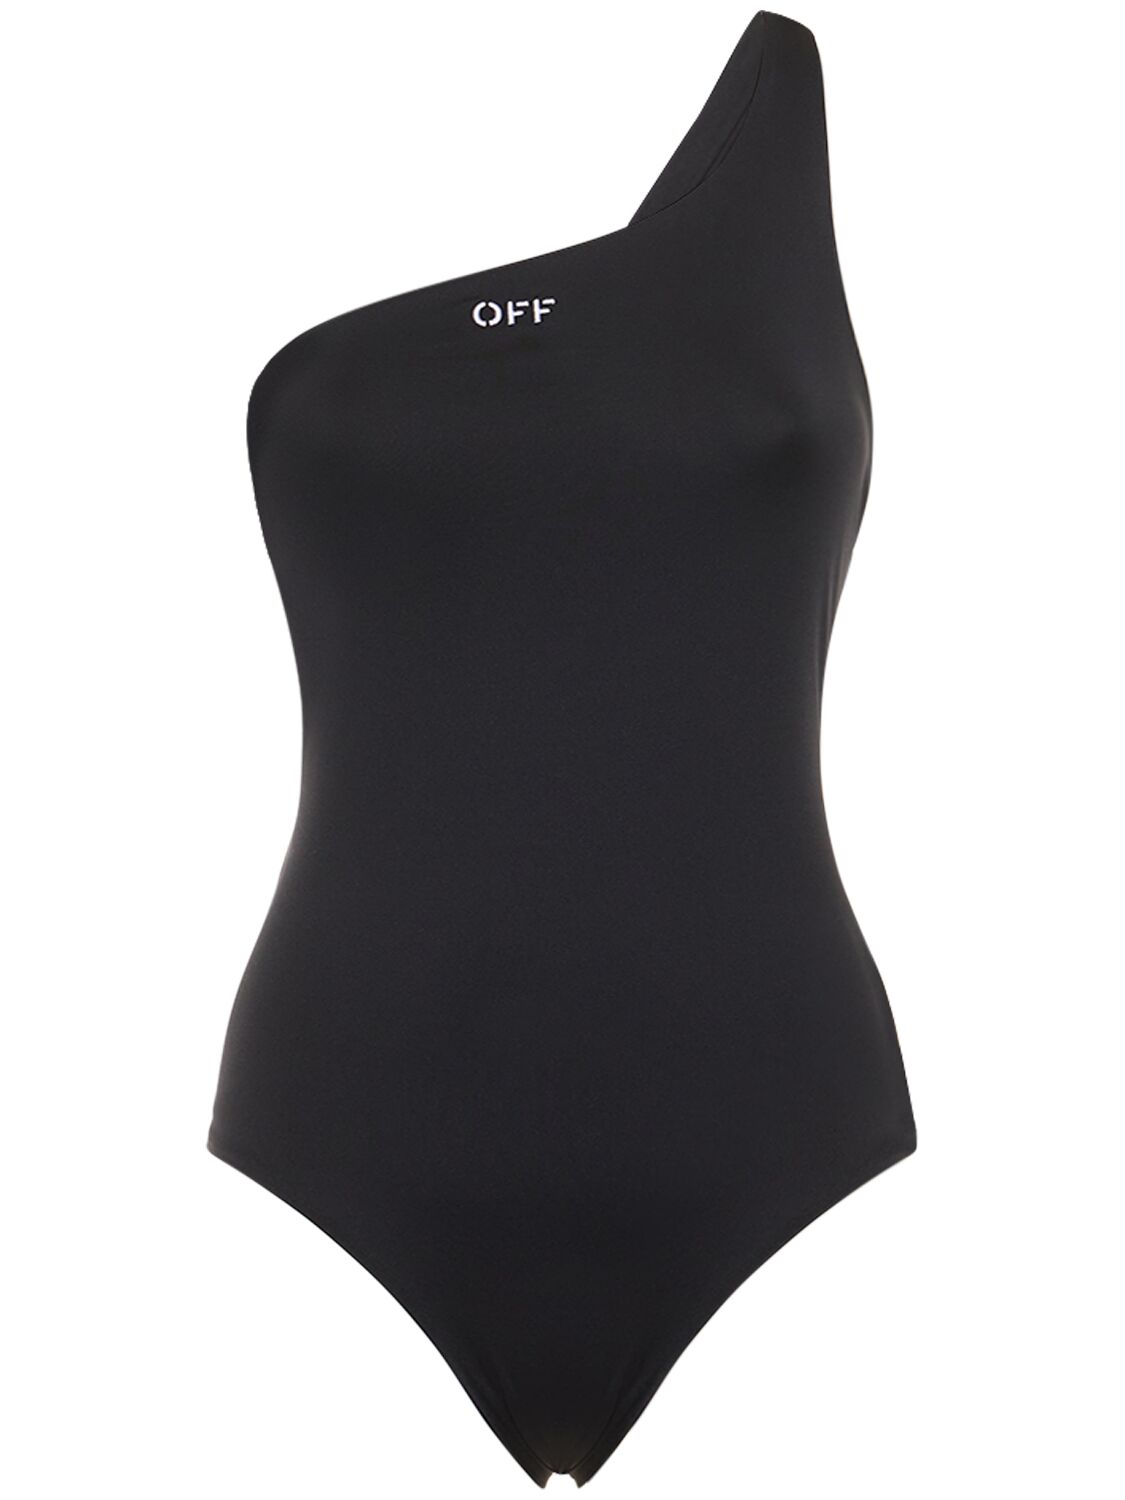 Off Stamp Lycra One-piece Swimsuit